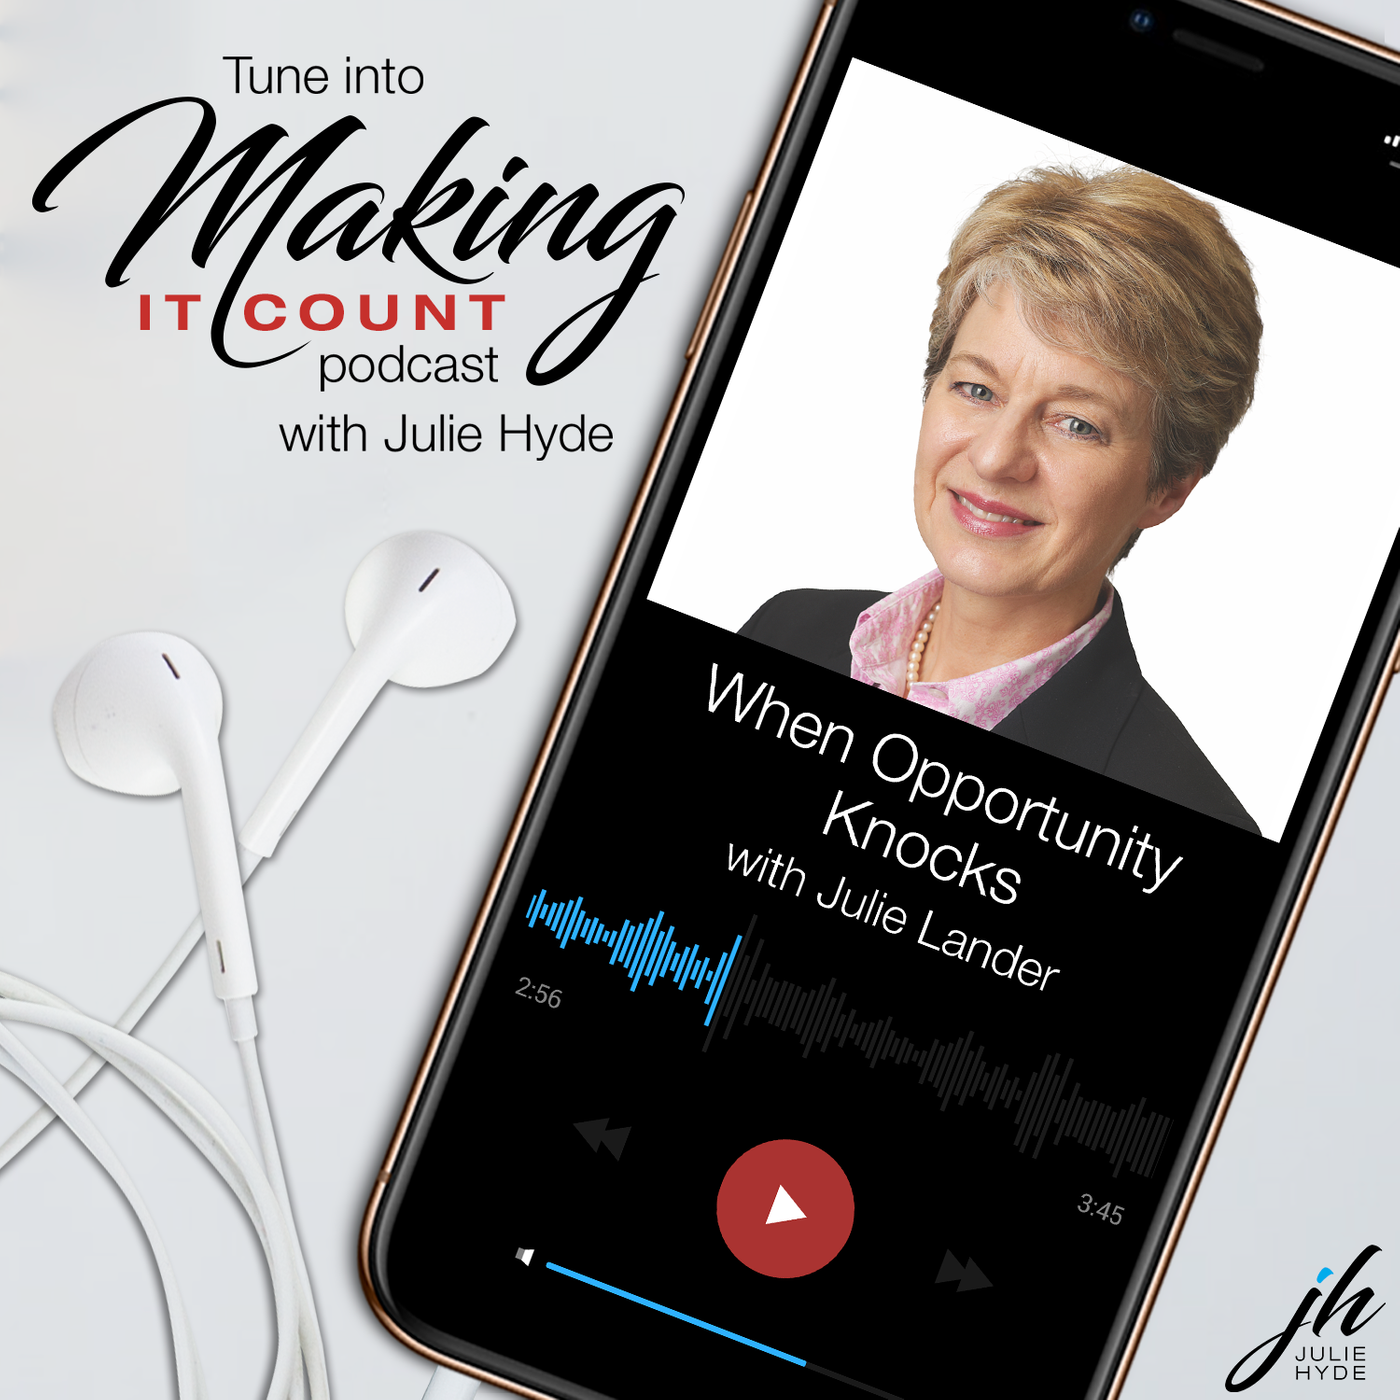 julie-lander-when-opportunity-knocks-julie-hyde-making-it-count-busy-leadership-leader-leaders-keynote-mindset-speaker-mentor-business-empower-lead-empowering-podcast-great-intentional-authentic-mentor-coach-role-model-top-best-inspire-engage-practical-insightful-boost-performance-tips-how-to-strategy-powerful-change-mindset-thrive-results-corporate-future-smart-program-mentorship-career-next-level-step-reconnect-control-proactive-agile-adaptable-one-on-one-woman-lady-boss-female-sydney-australia-speaker-host-guide-guidance-business-ceo-management